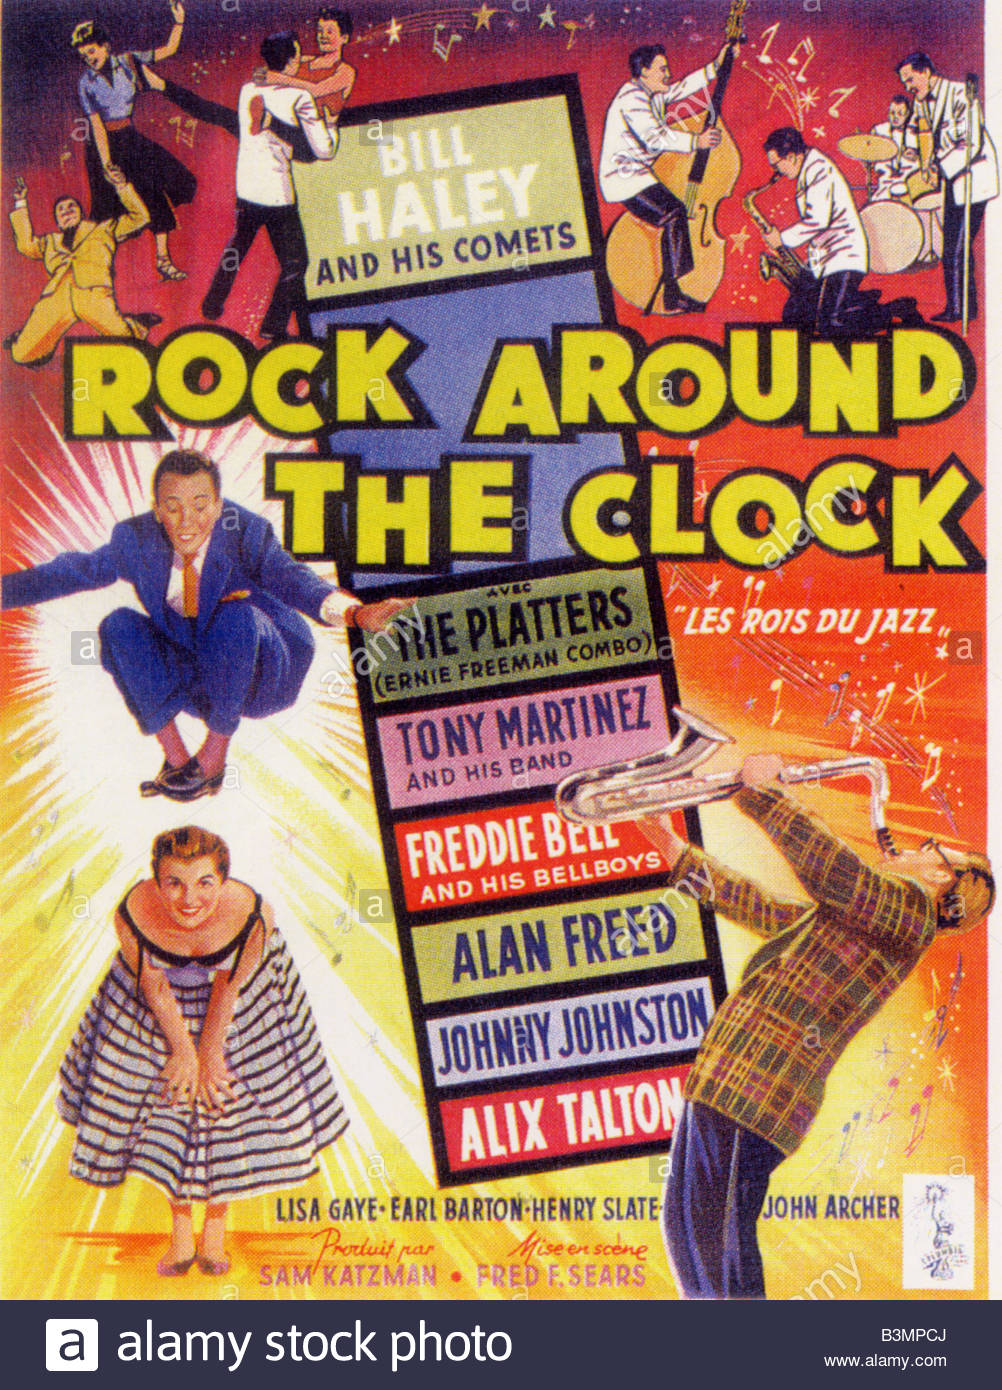 Rock Around the Clock Bill Haley feat. His Comets